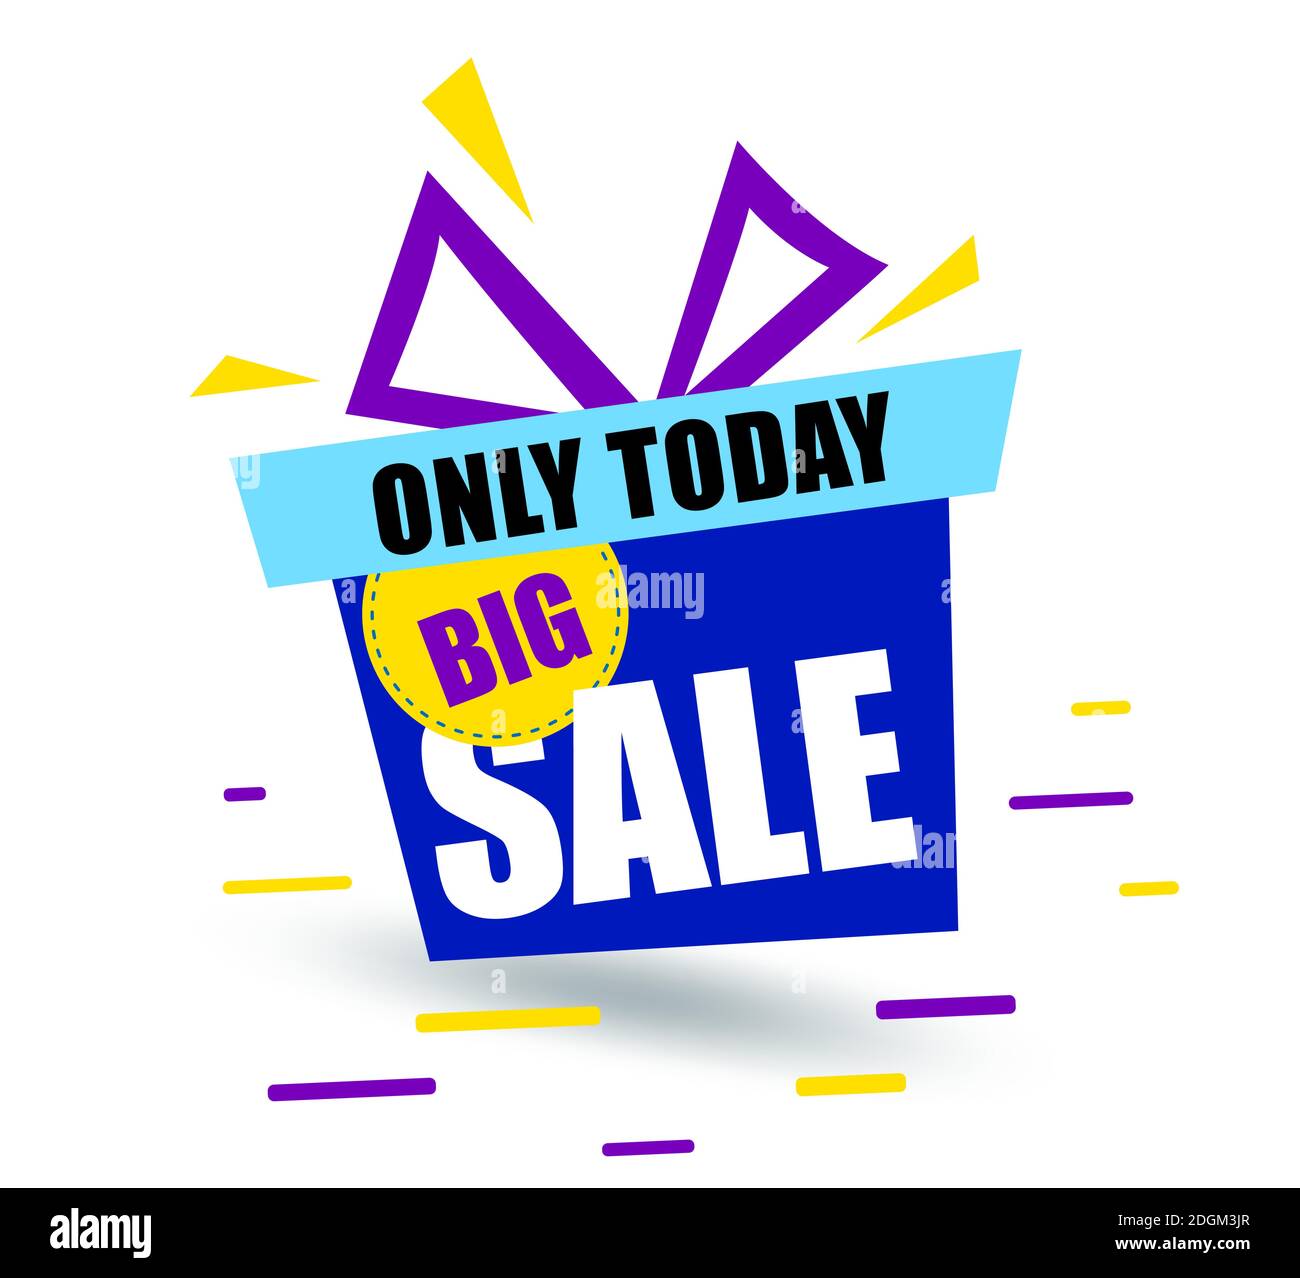 https://c8.alamy.com/comp/2DGM3JR/banner-big-sale-blue-gift-box-says-sale-only-today-promotion-background-offer-bluel-sale-tag-vector-banner-in-modern-flat-style-on-white-2DGM3JR.jpg